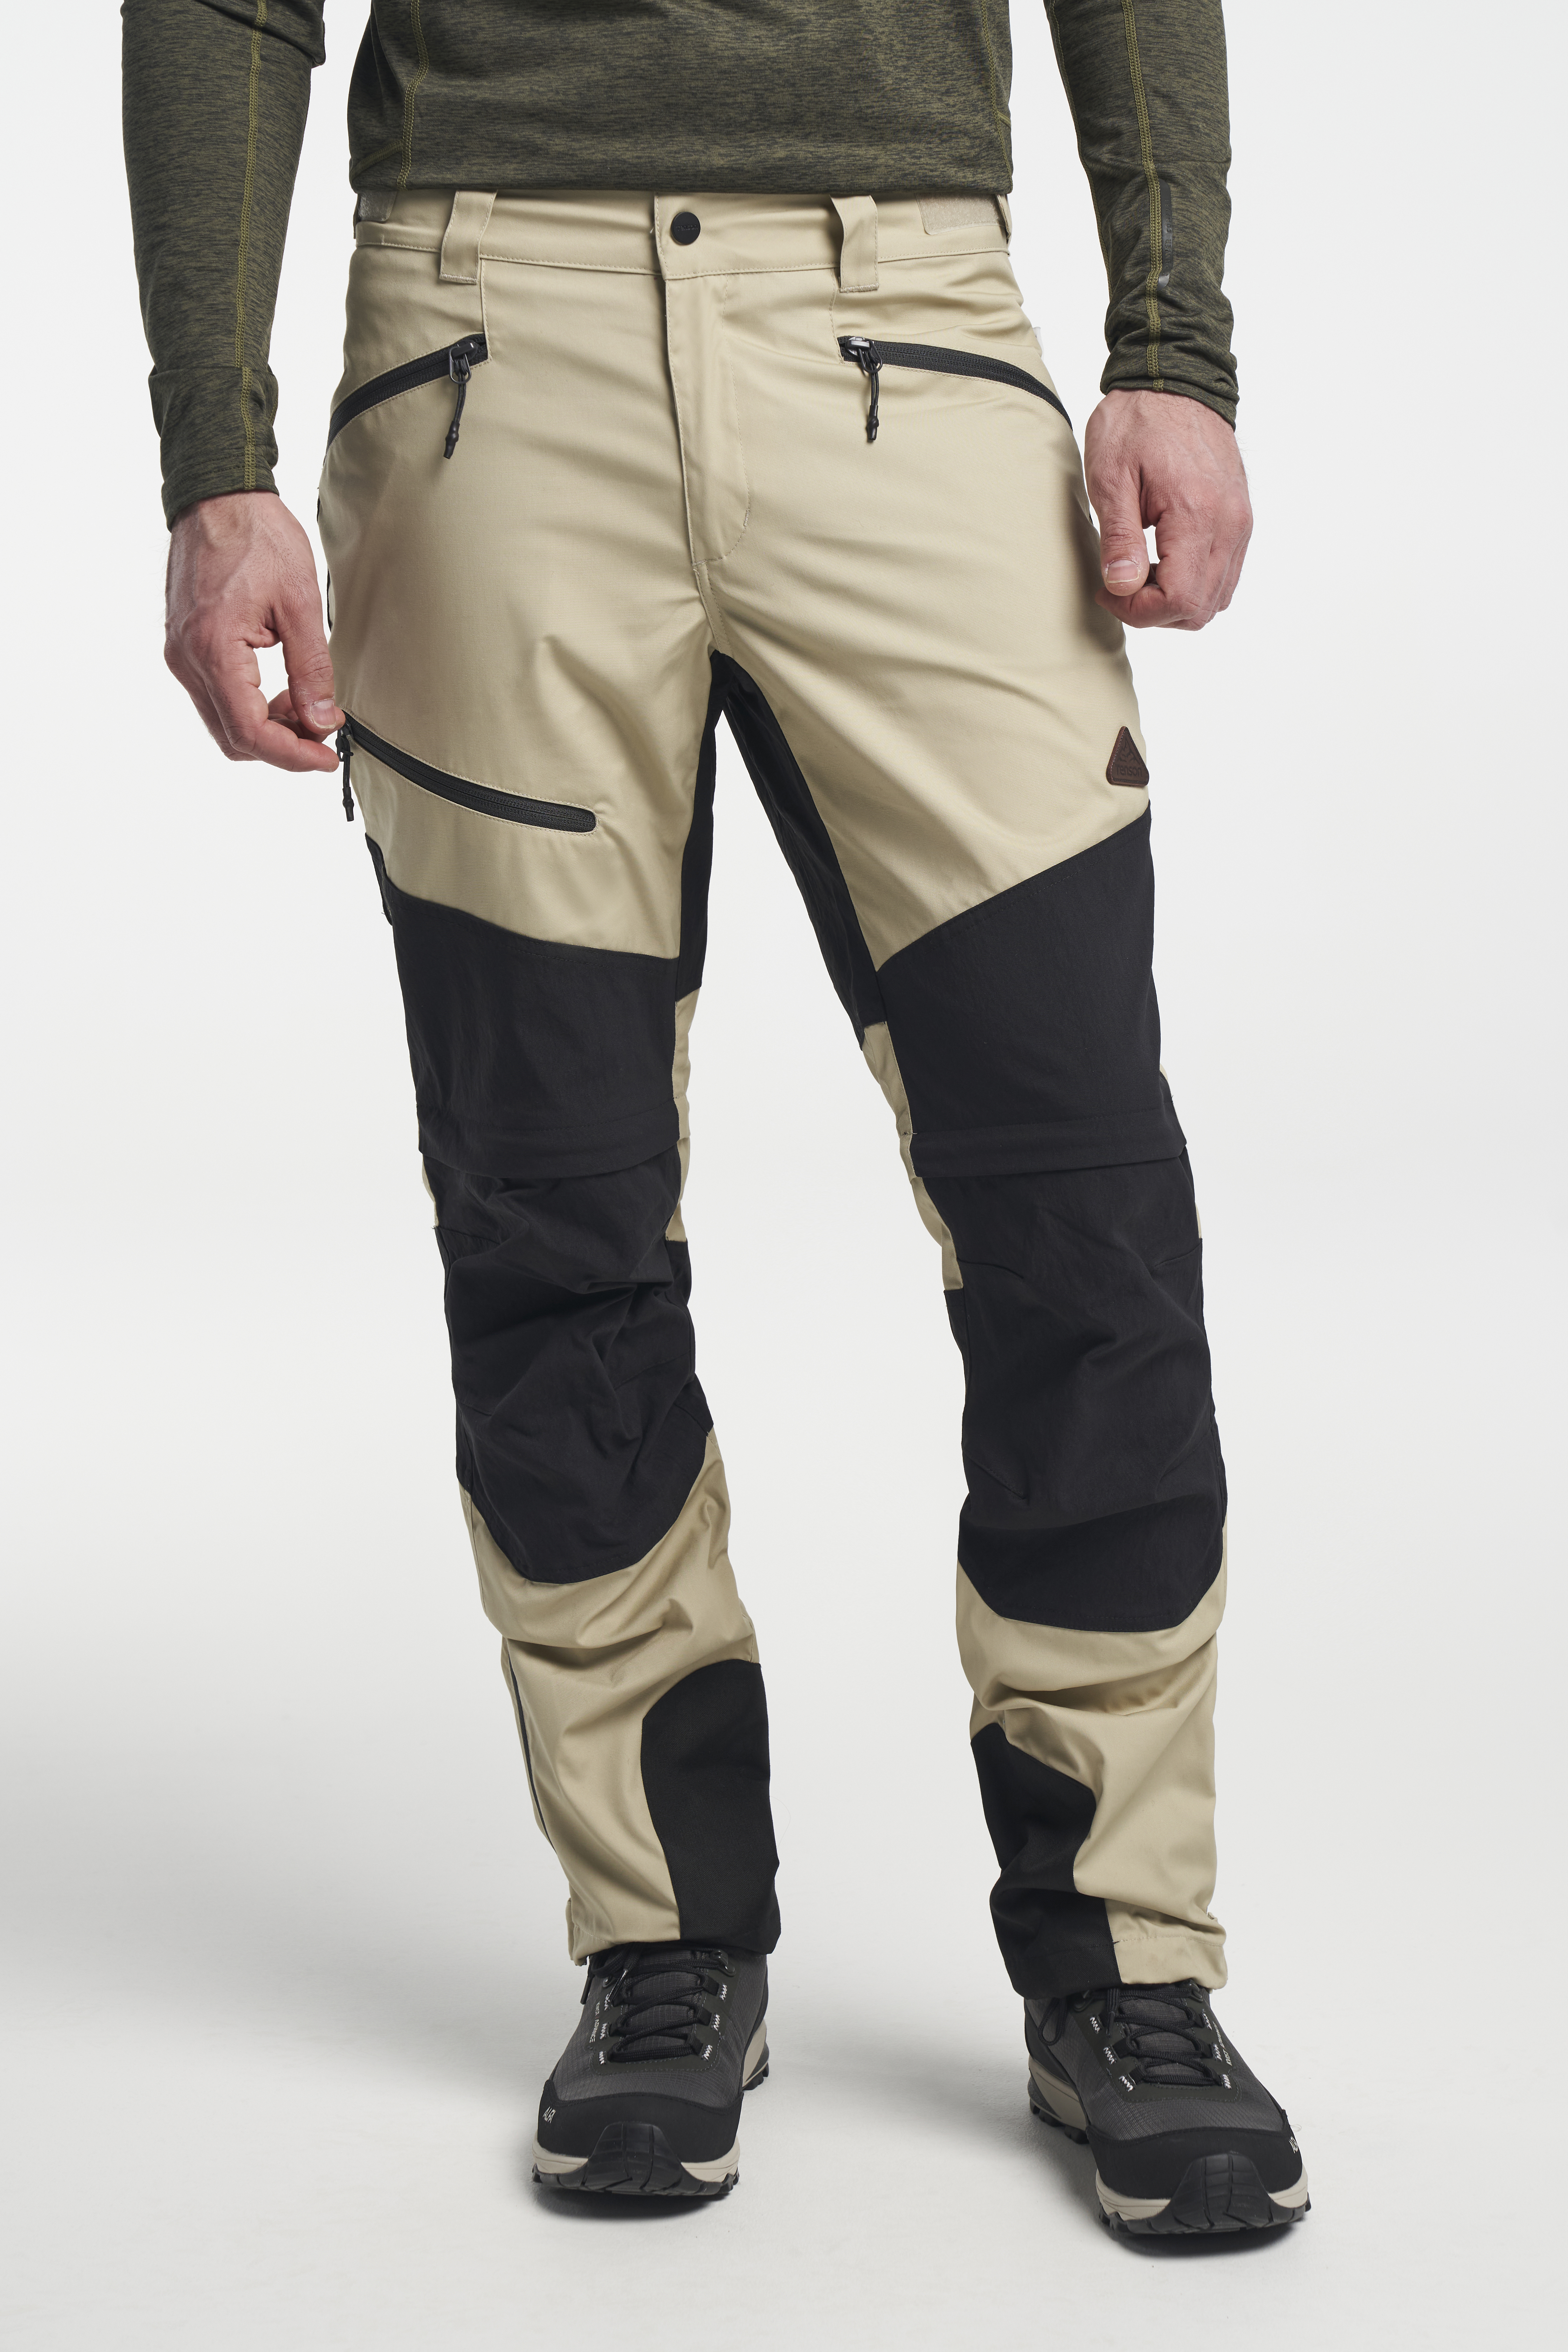 Hiking pants guide  Maier Sports